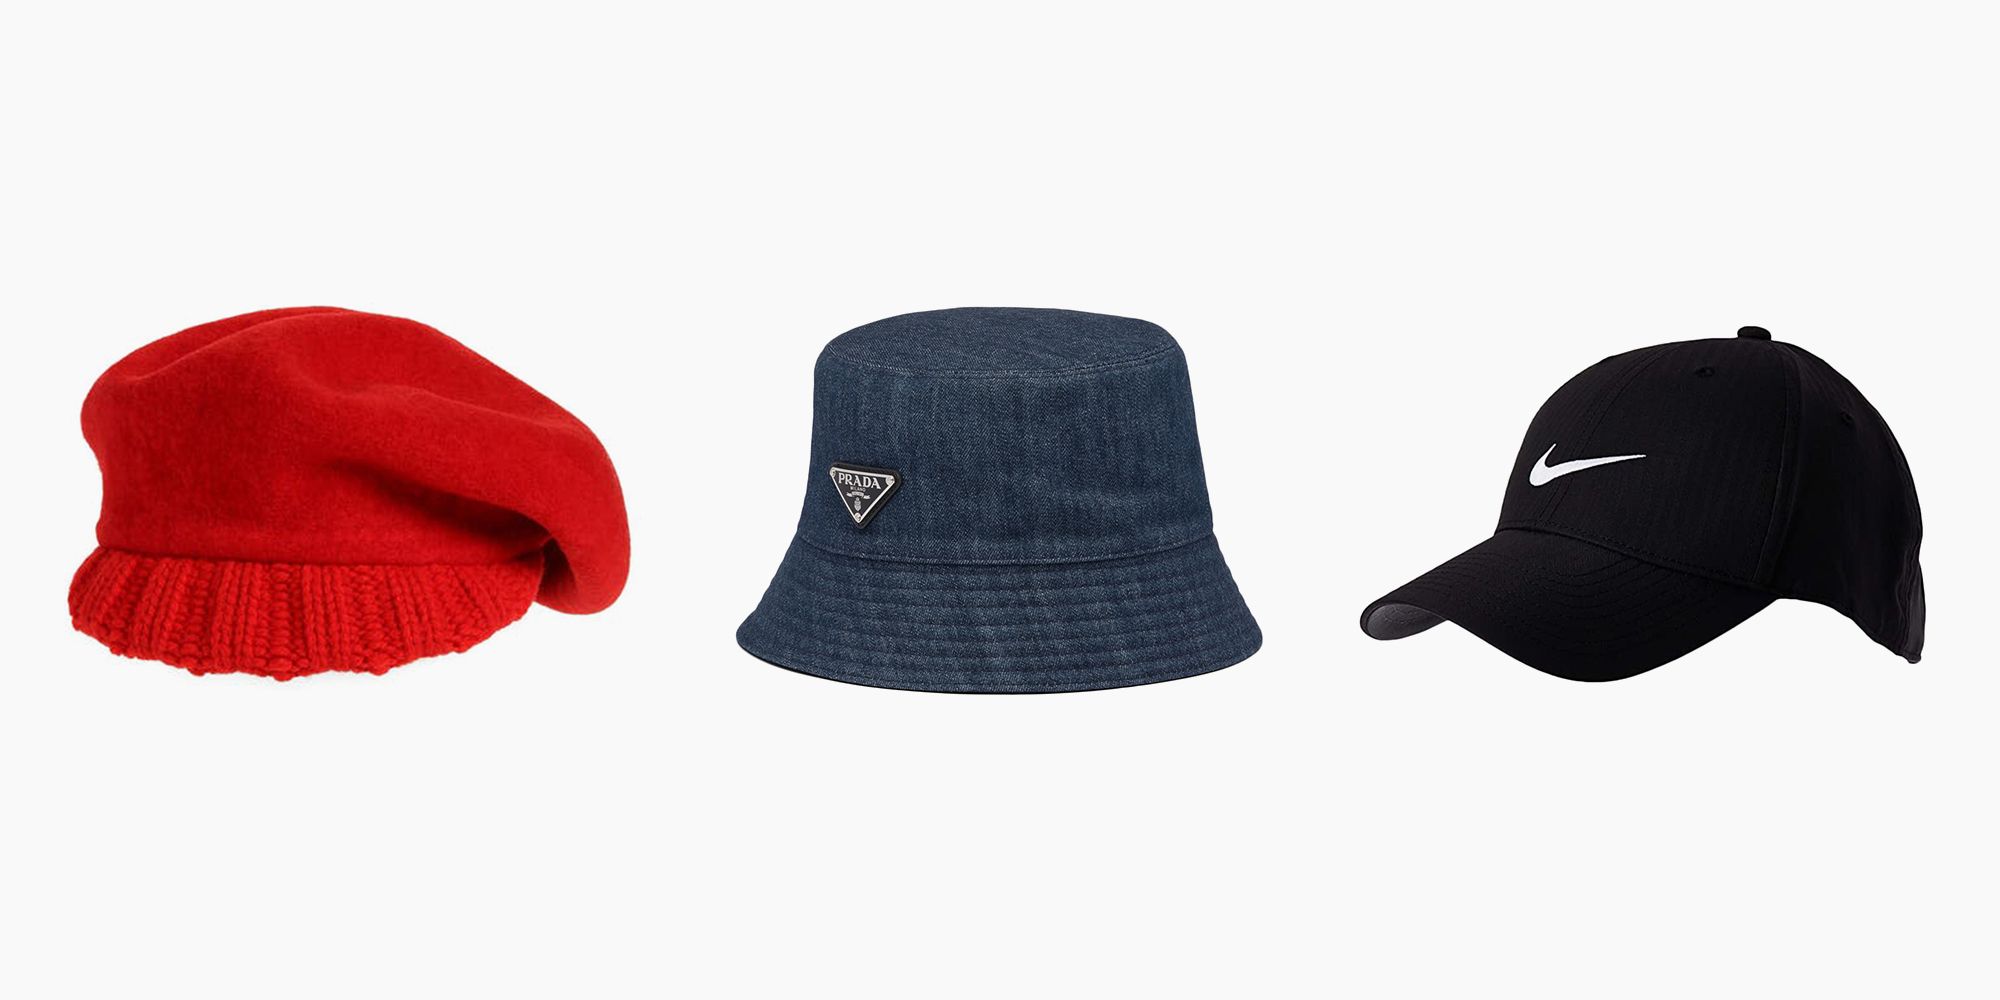 25 Best Trendy Hats of 2023, from Bucket Hats to Baseball Caps